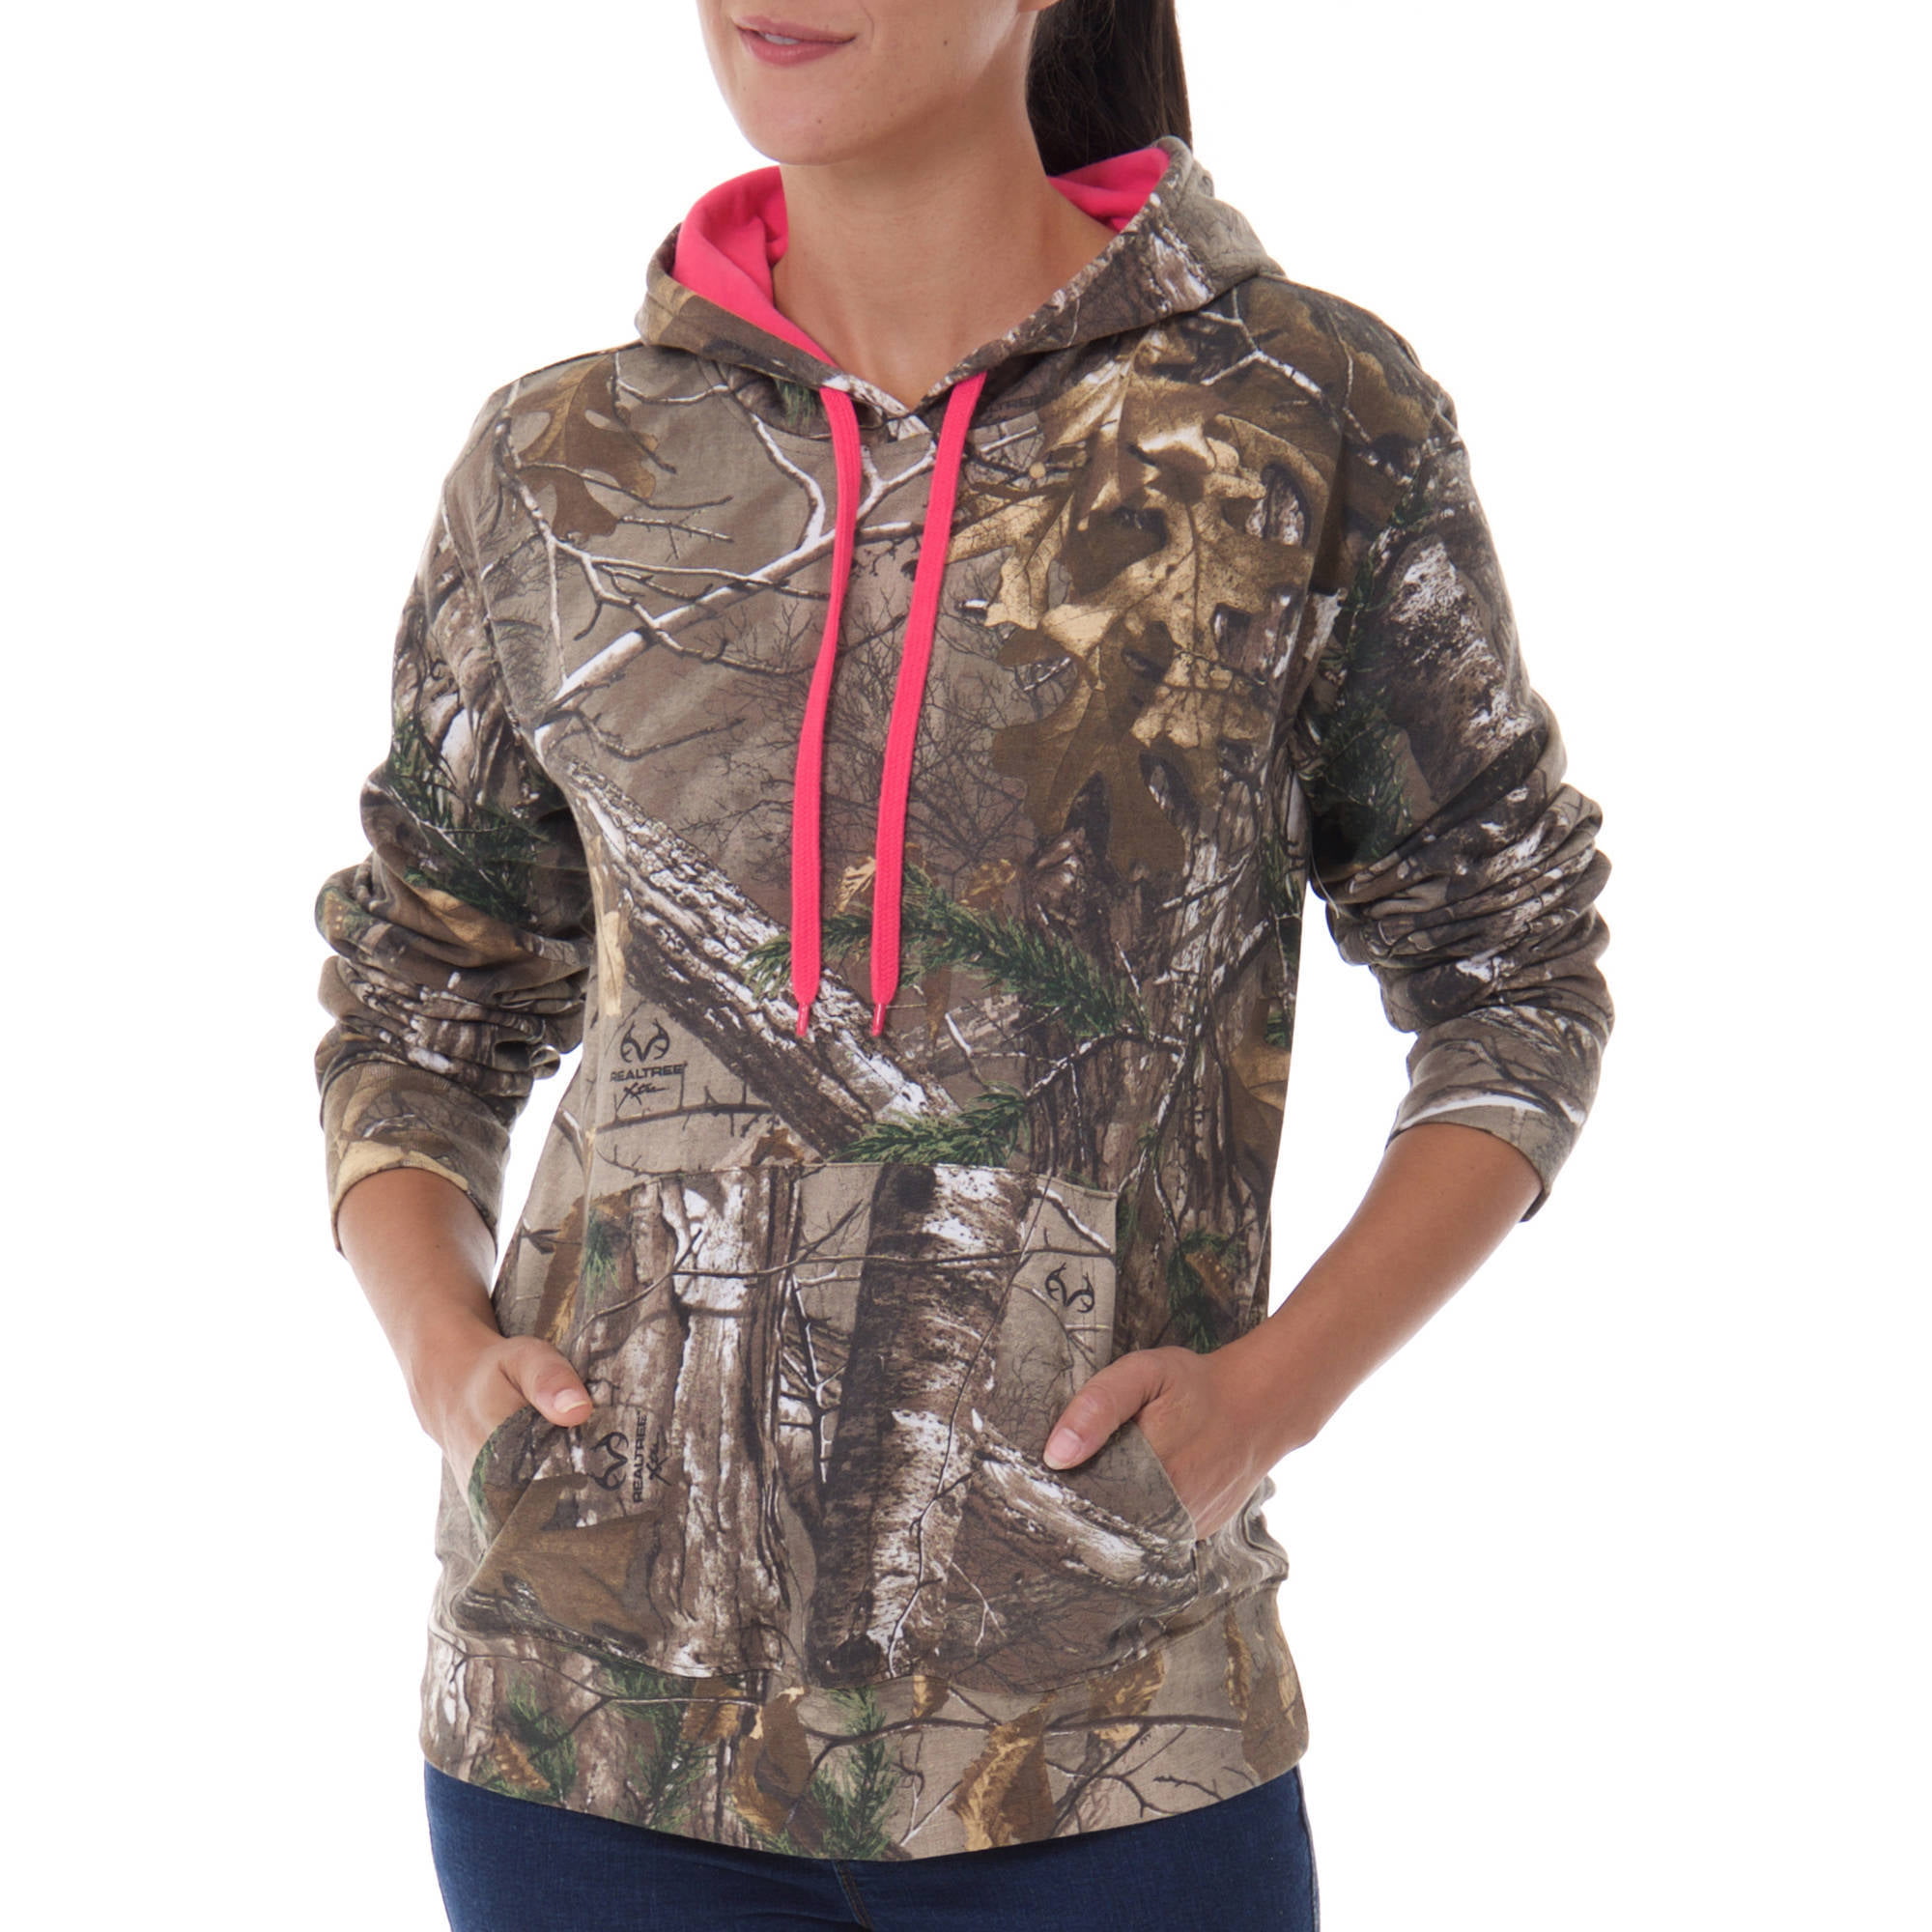 ReachMe Womens Casual Camo Hoodie with Kangaroo Pocket Lightweight Camouflage Drawstring Pullovers 